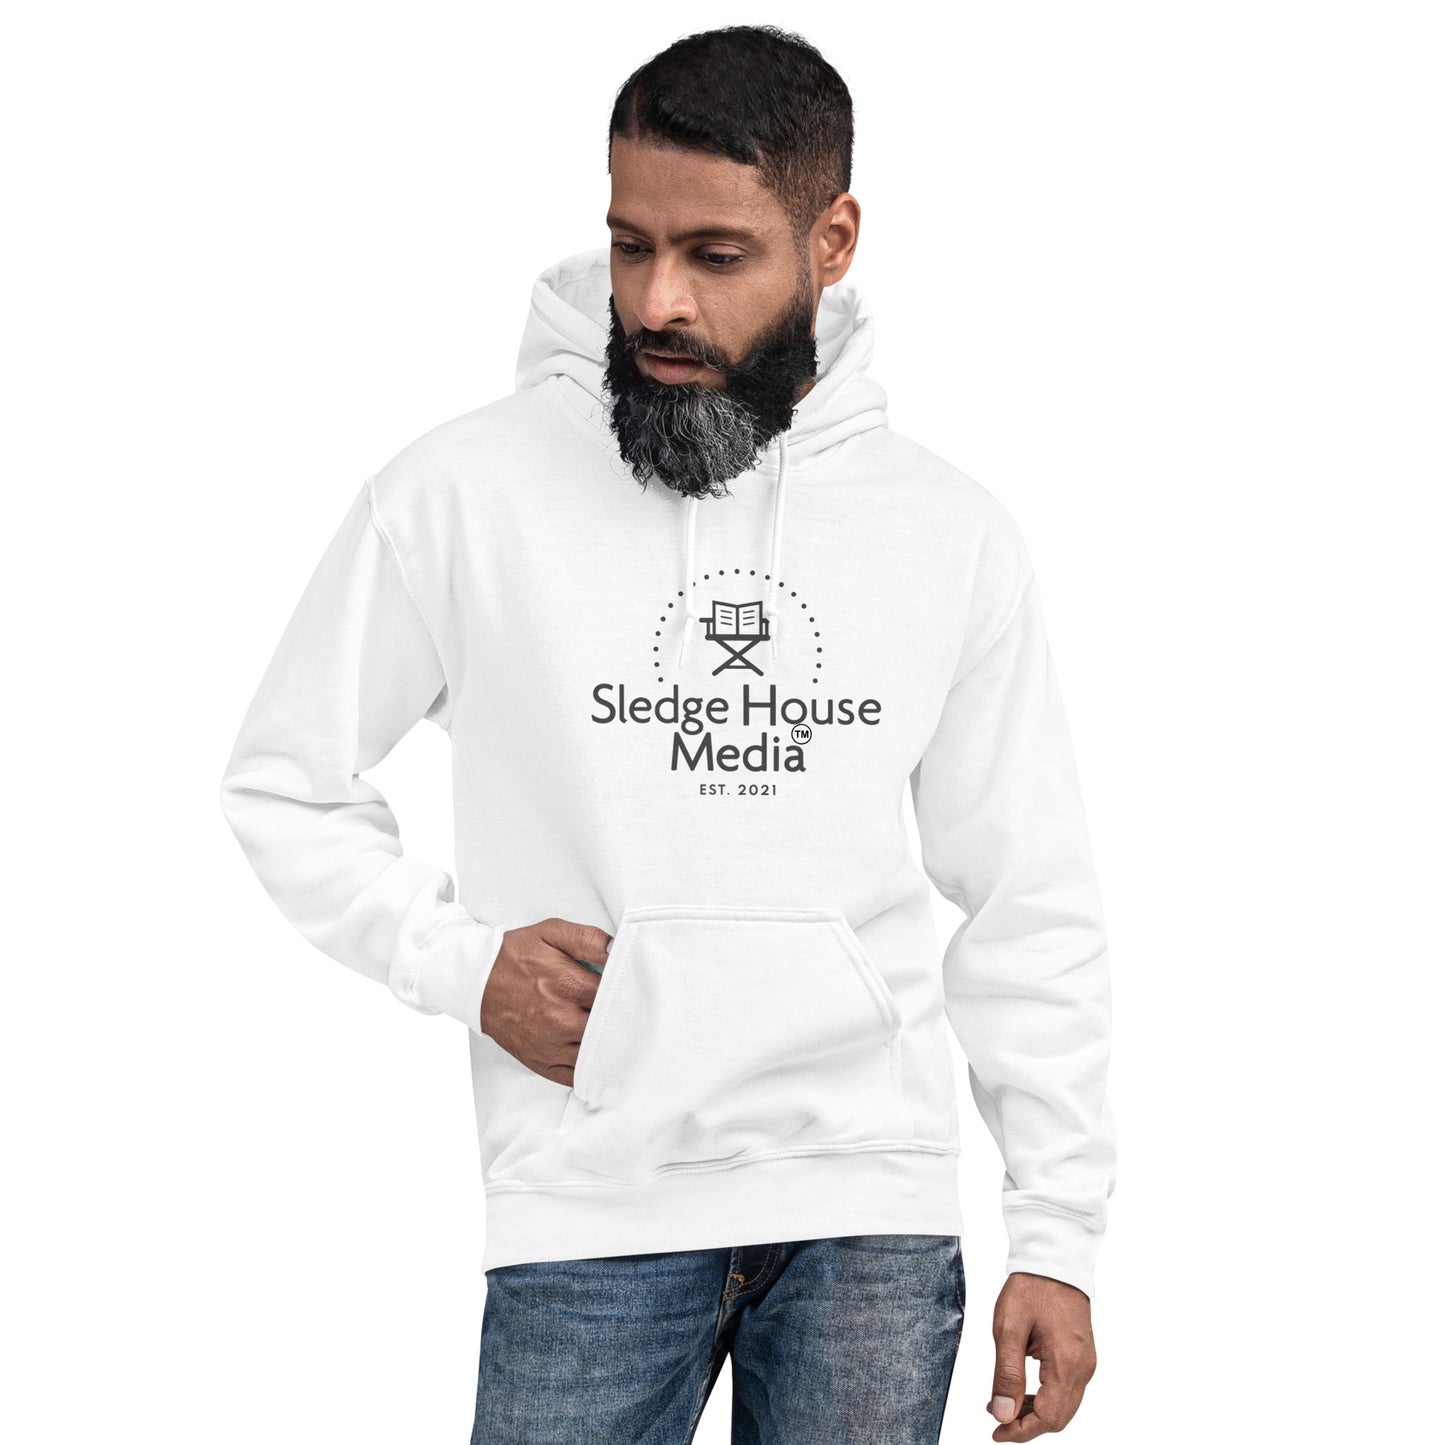 « The OG » Sledge House Media Every Day Sweat à capuche unisexe blanc ou rose confortable